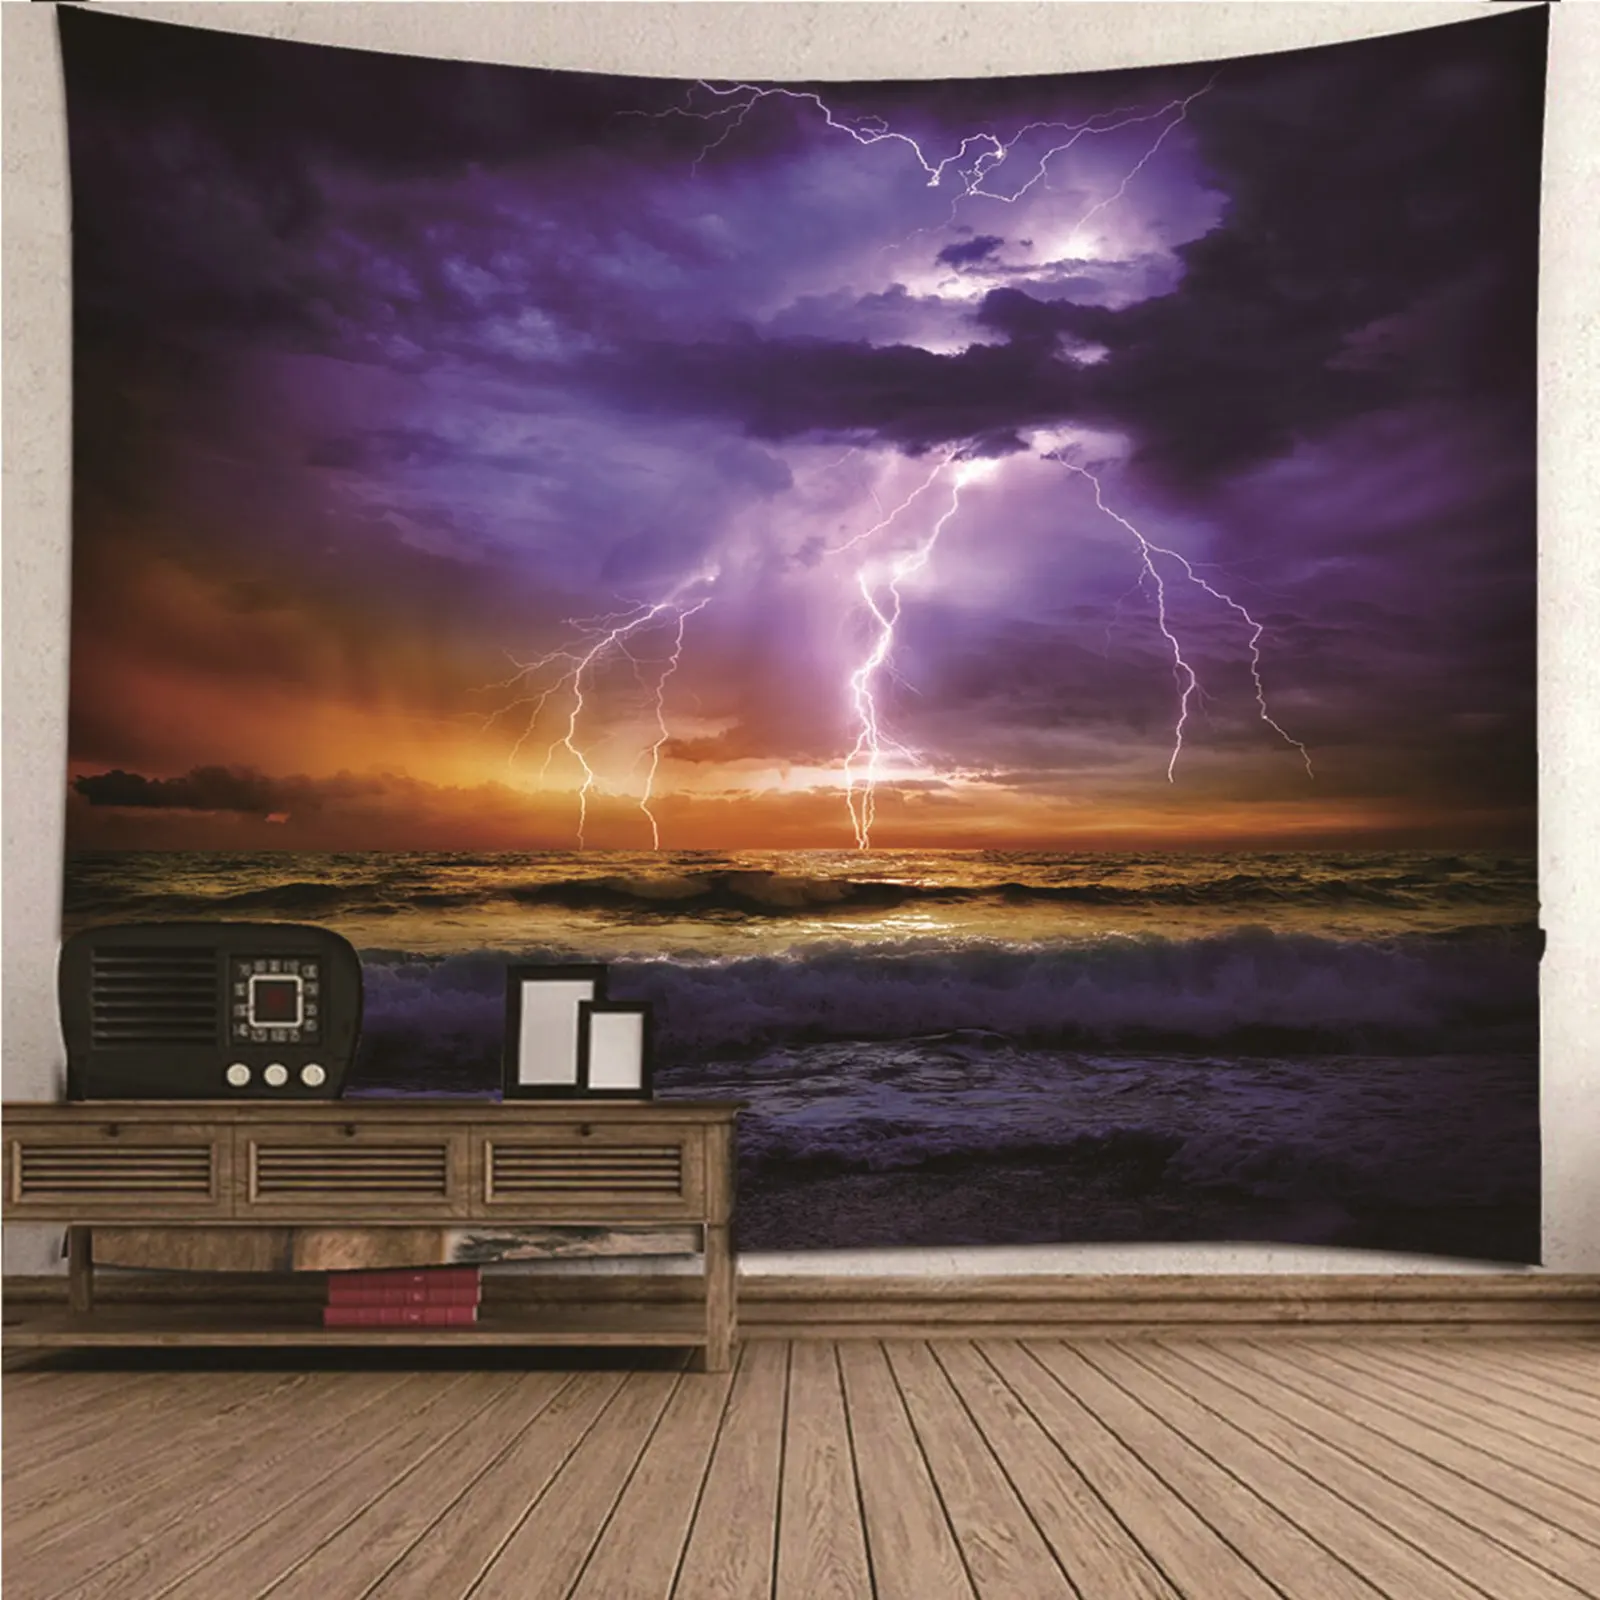 

Large Tapestry Long Tapestry For Ceiling natural scenery Sea Lightning Wall Hanging Blanket Dorm Art Decor Covering